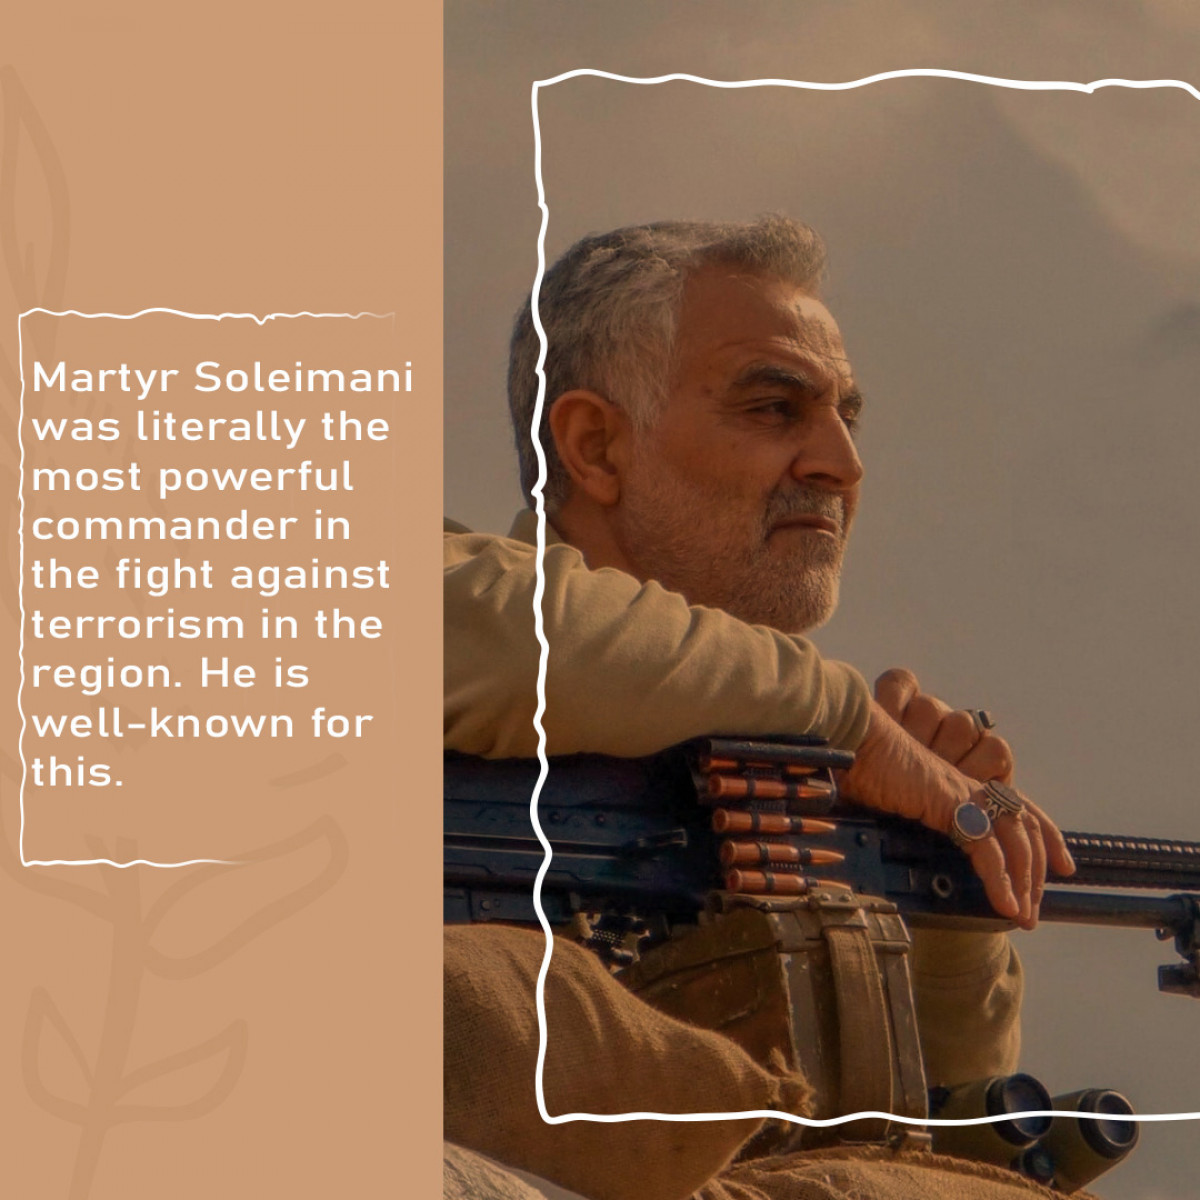 Martyr Soleimani was literally the most powerful commander in the fight against terrorism in the region. He is well-known for this